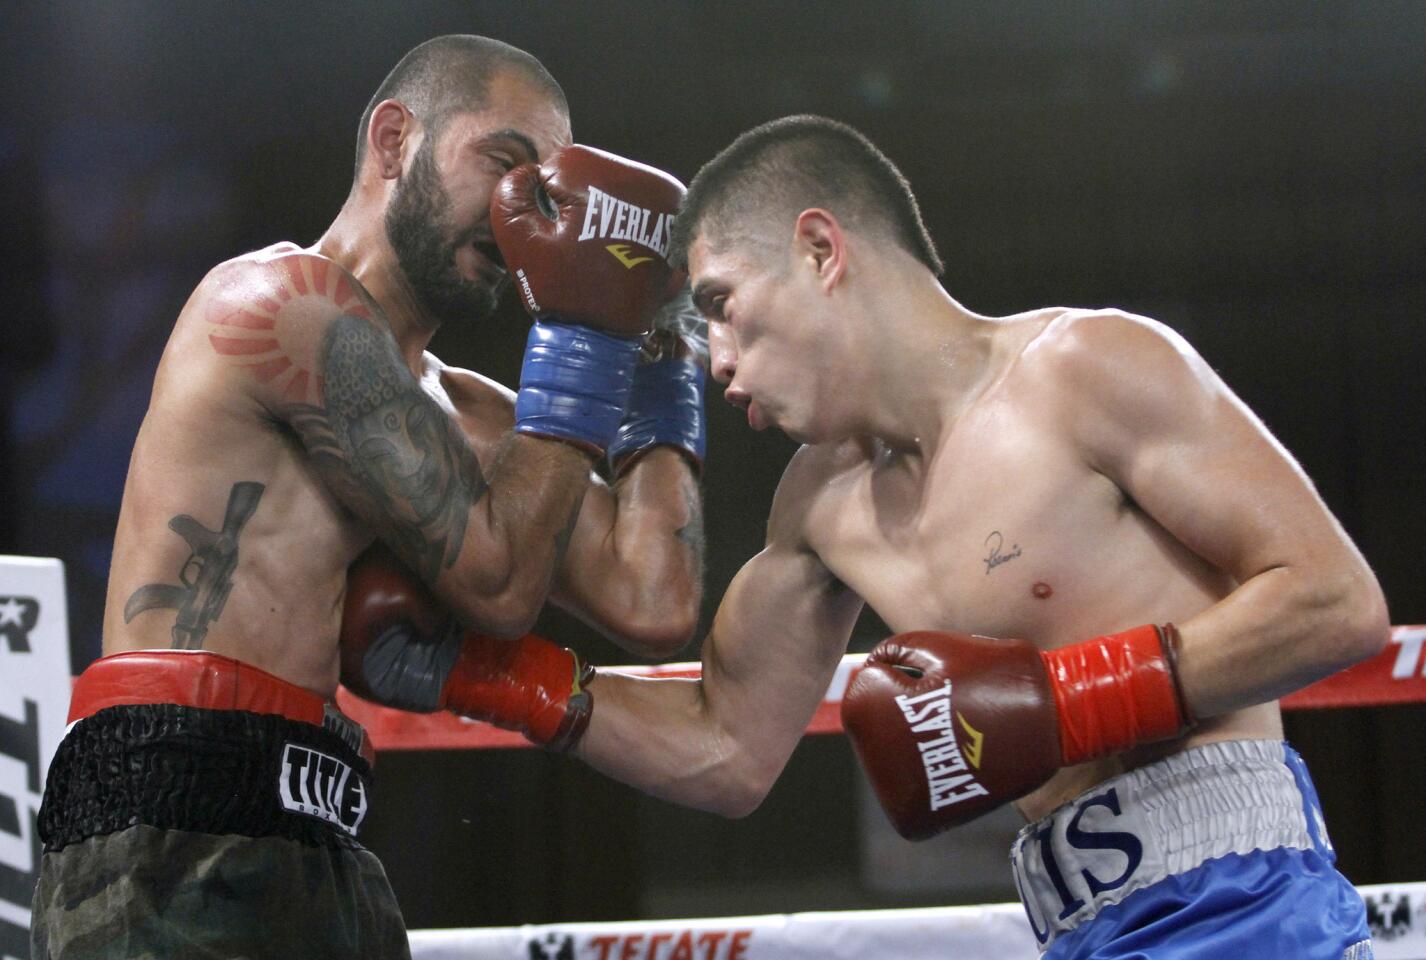 Eventual winner Luis Sedano of Duarte, right, lands a blow to the body of Luis Diaz of Mexico, left, in the lightweight fight of Art of Boxing, Bash Boxing and Top Rank event at the Glendale Civic Auditorium on Saturday, Aug. 9, 2014.